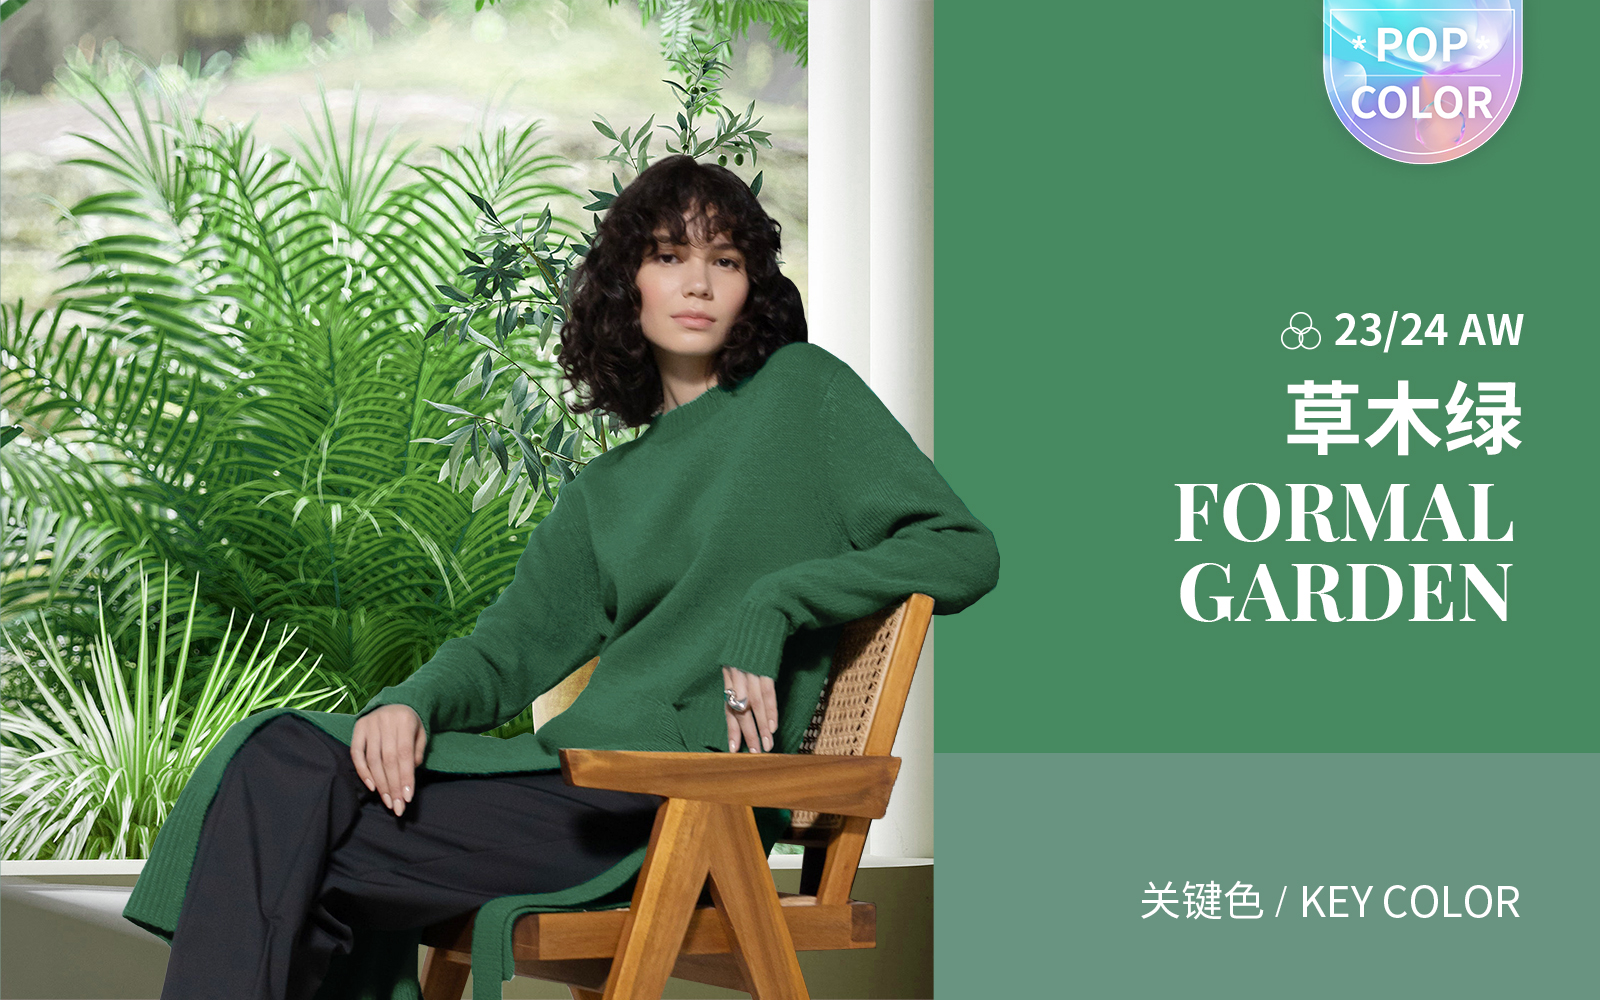 Formal Garden -- The Color Trend for Mature Women's Knitwear